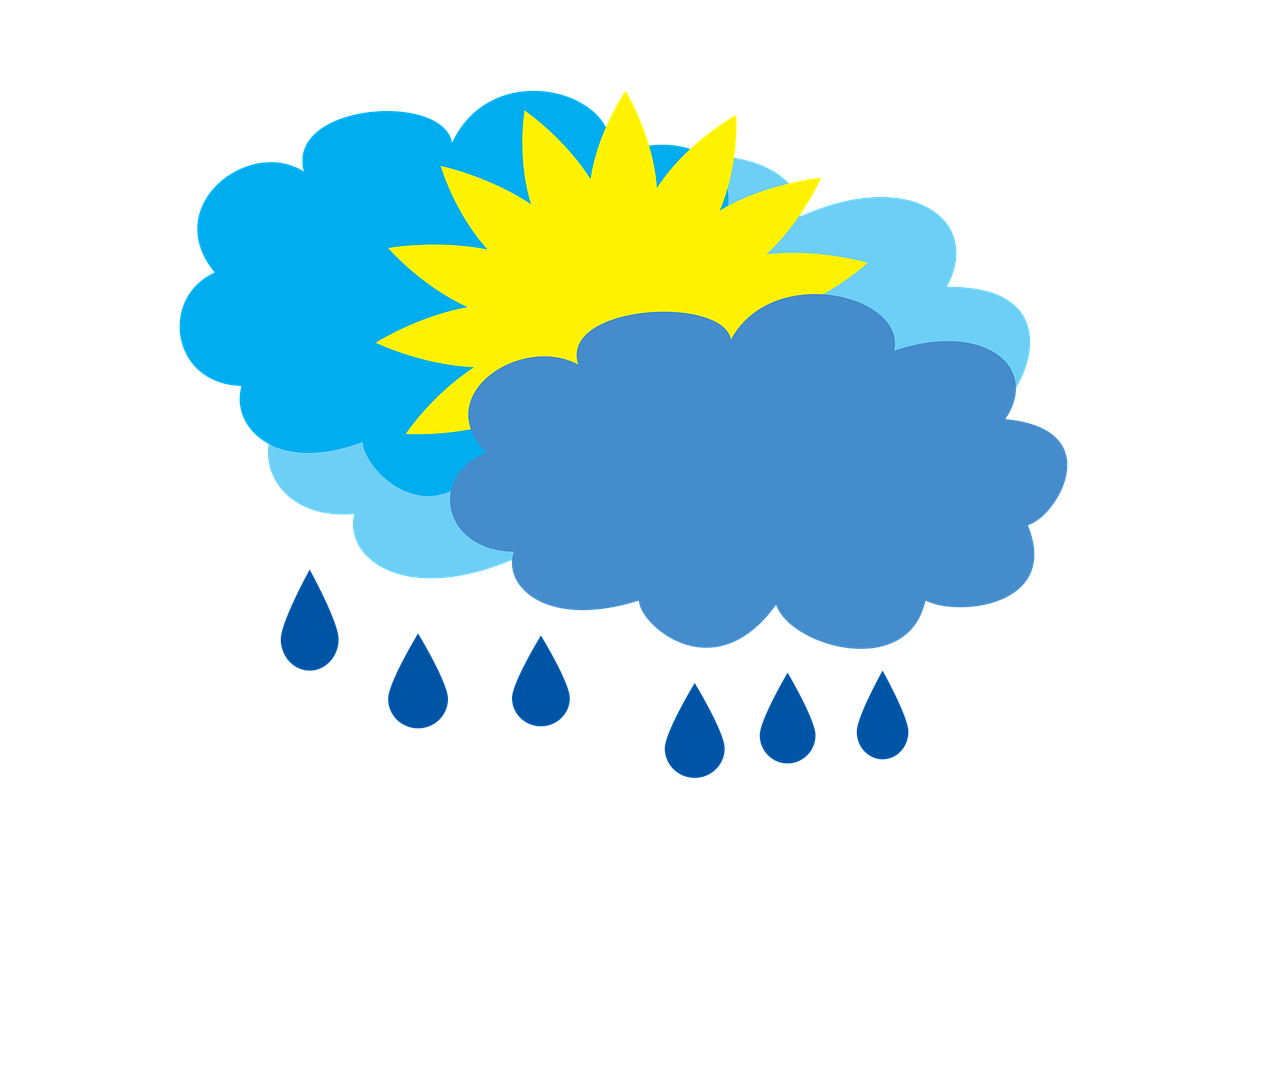 cloudy with rain weather forecast partly cloudy free photo